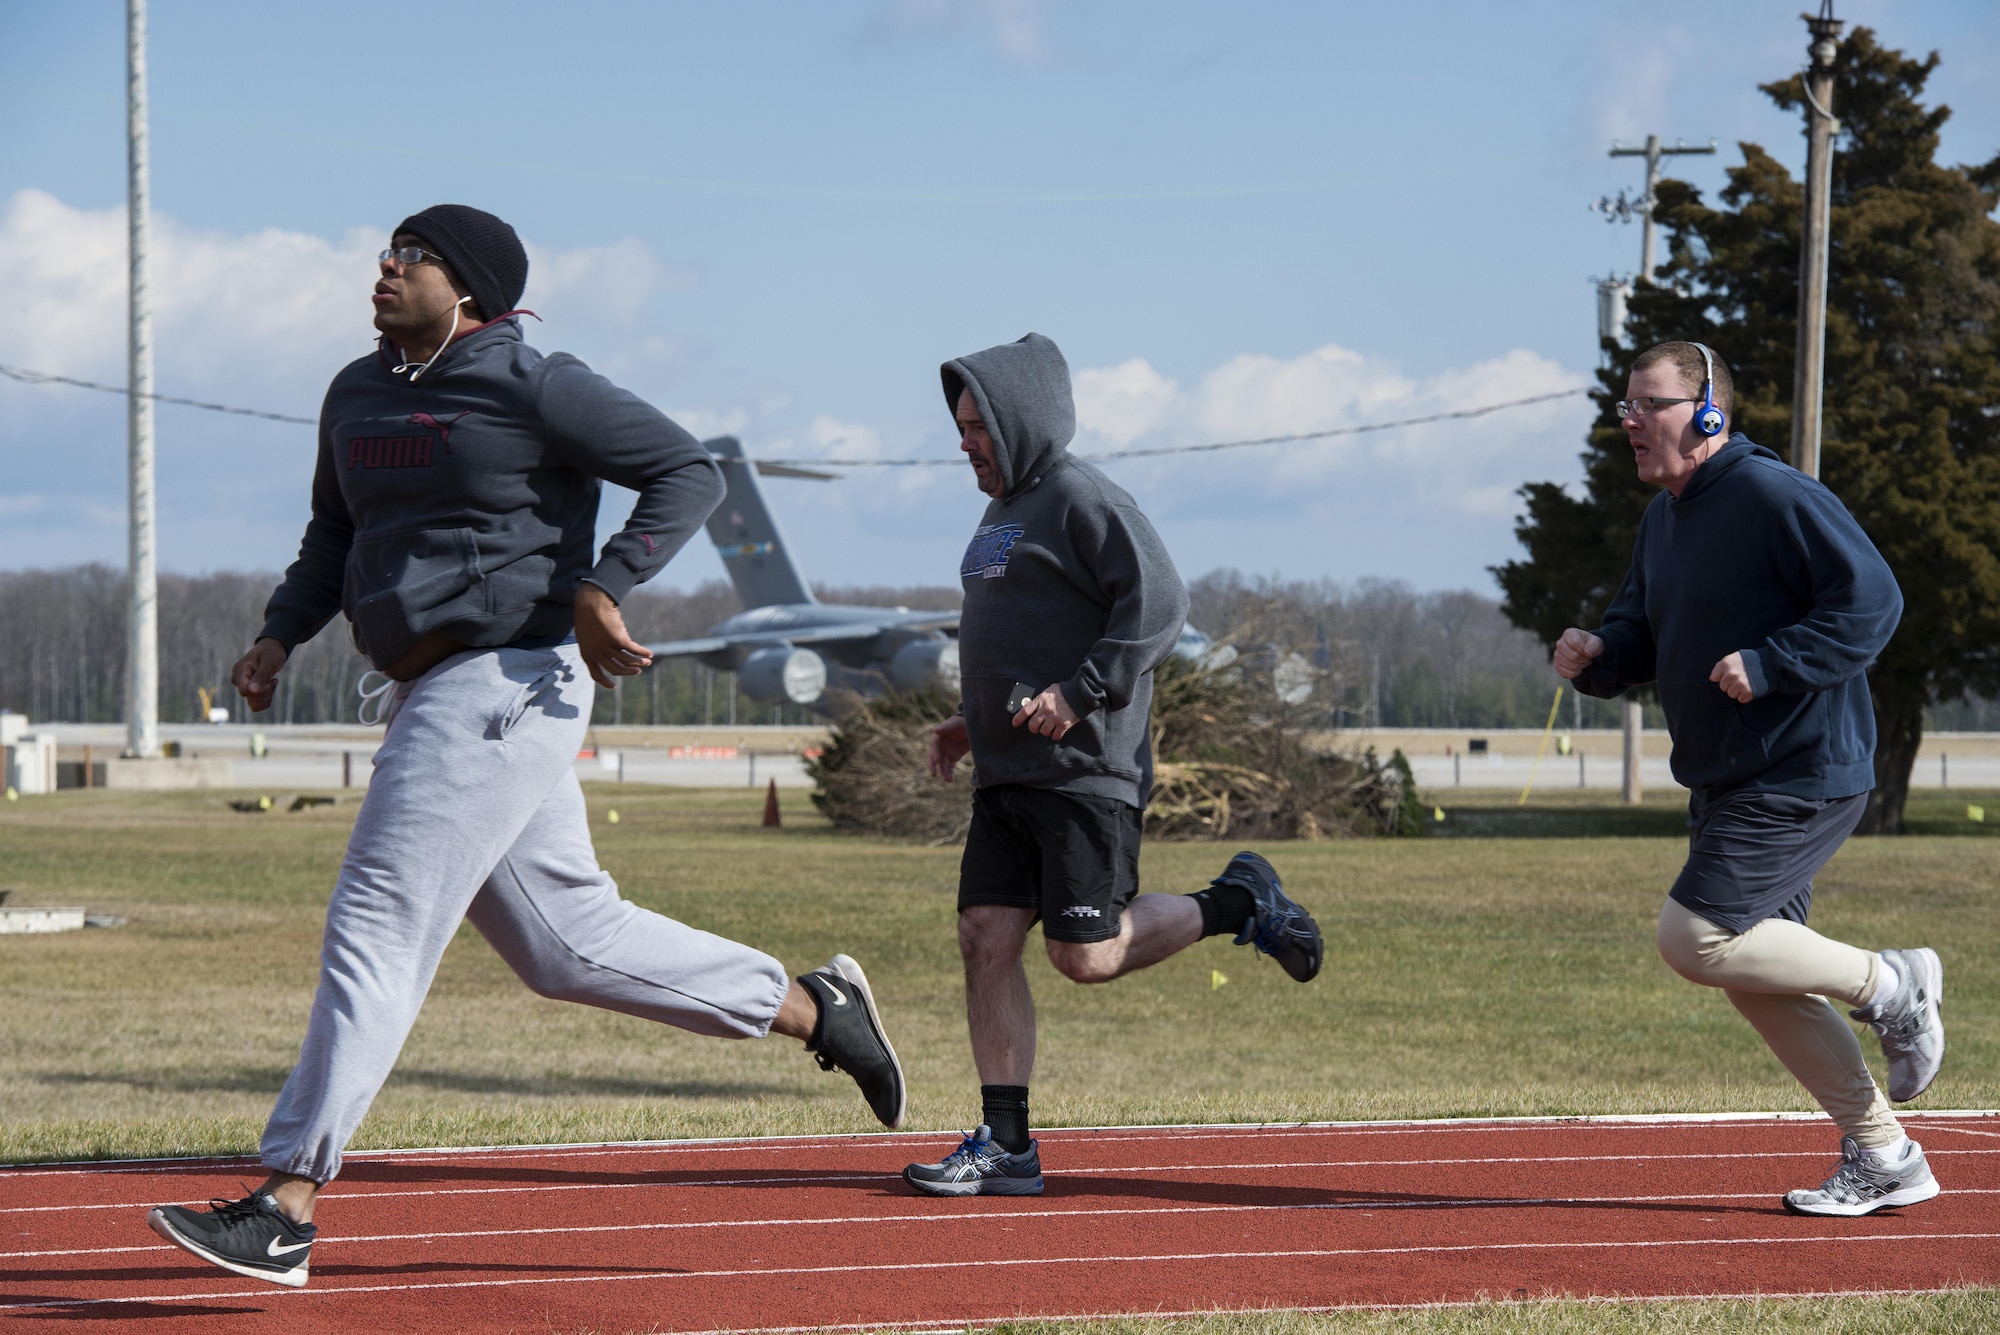 Members of Team Dover sprint the straightaway during a 90 Plus class, hosted by the fitness center, Jan. 30, 2017, at the track on Dover Air Force Base, Del. The Fitness center leads more than 150 free classes each month, including 90 Plus, TS-24, TRX and Extreme Fitness. (U.S. Air Force photo by Senior Airman Aaron J. Jenne)